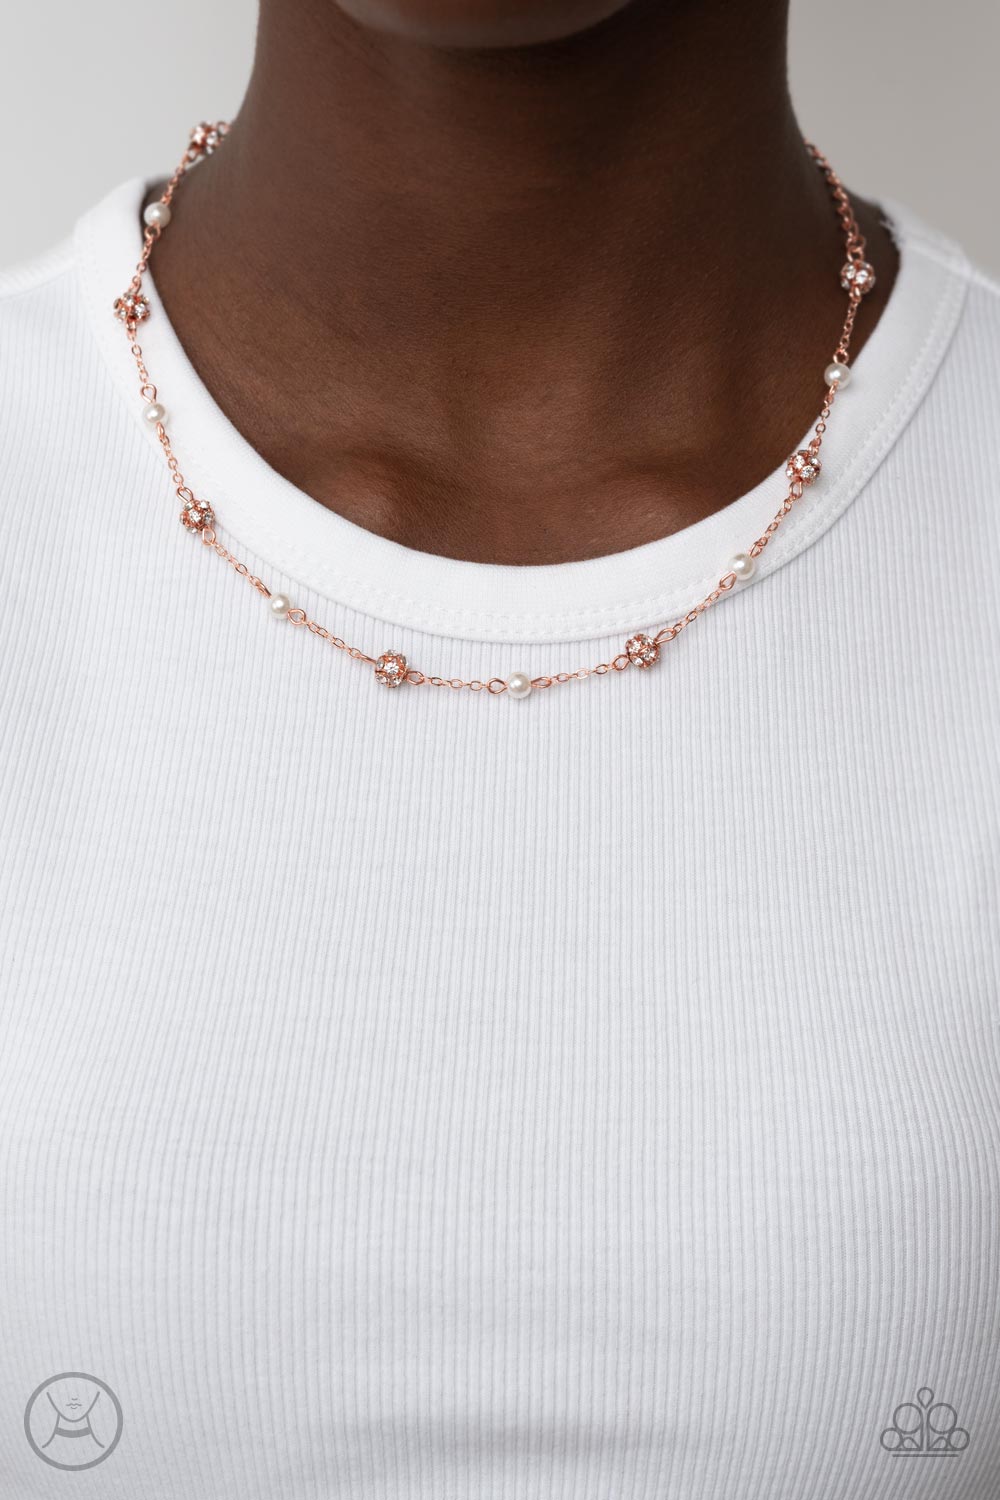 Rumored Romance Paparazzi Accessories Choker with Earrings Copper